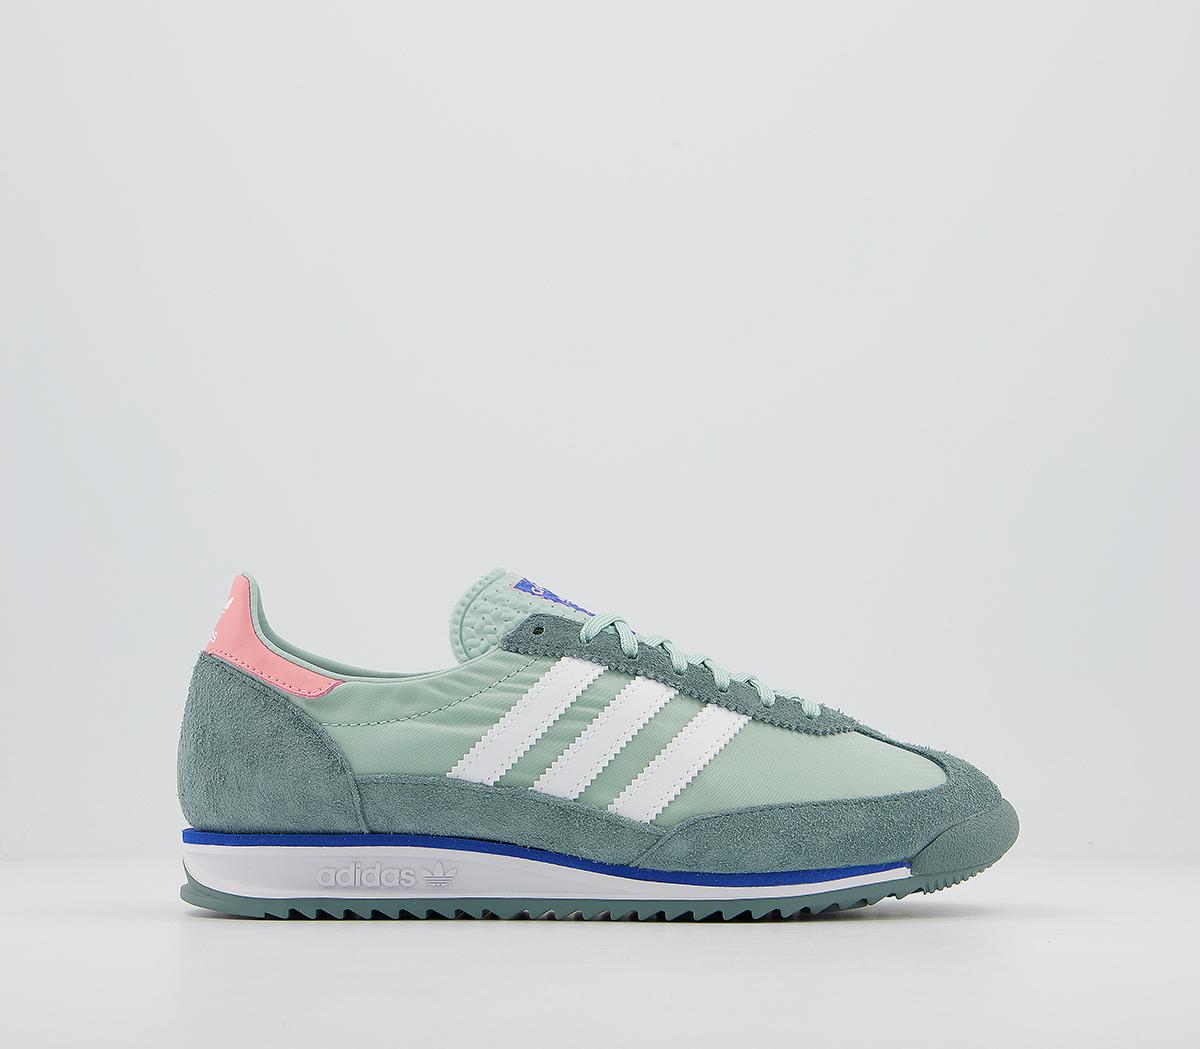 adidas Sl 72 Trainers Green Tint White Raw Green - Women's Trainers